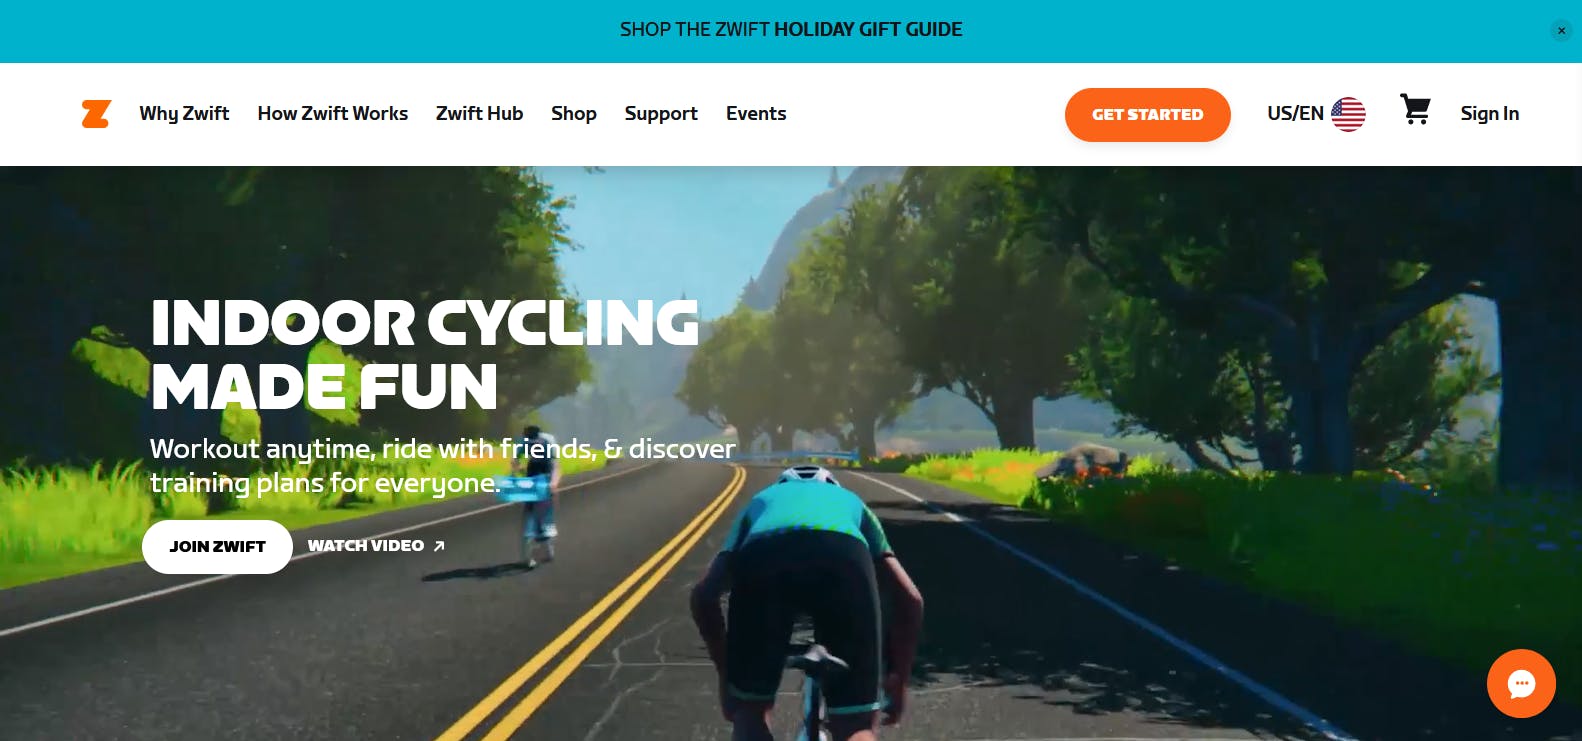 An image of the Zwift website.